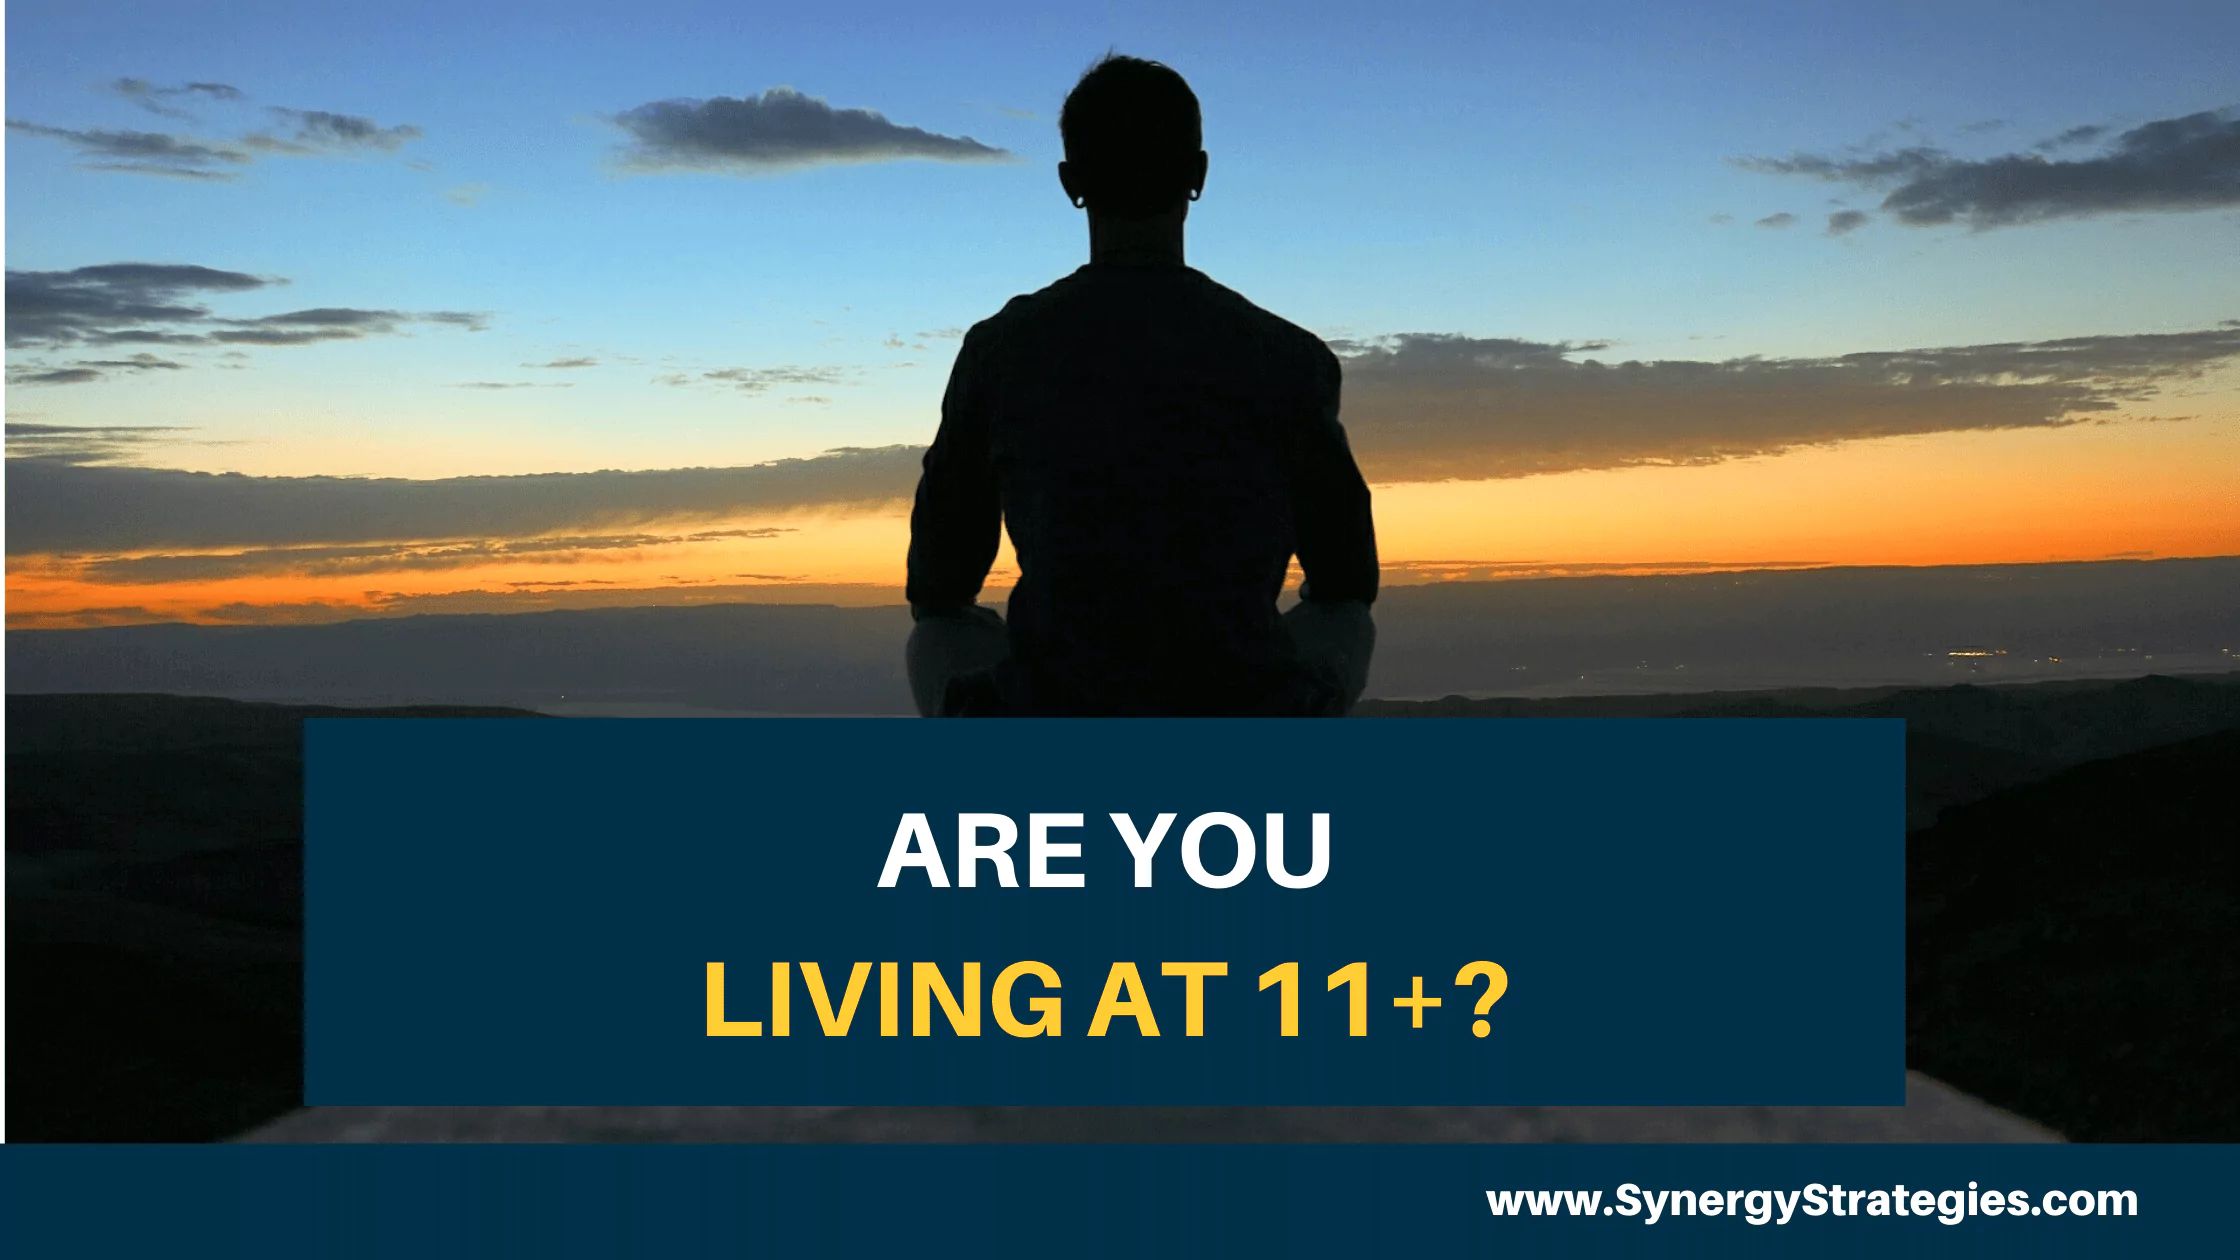 ARE YOU LIVING AT 11+?